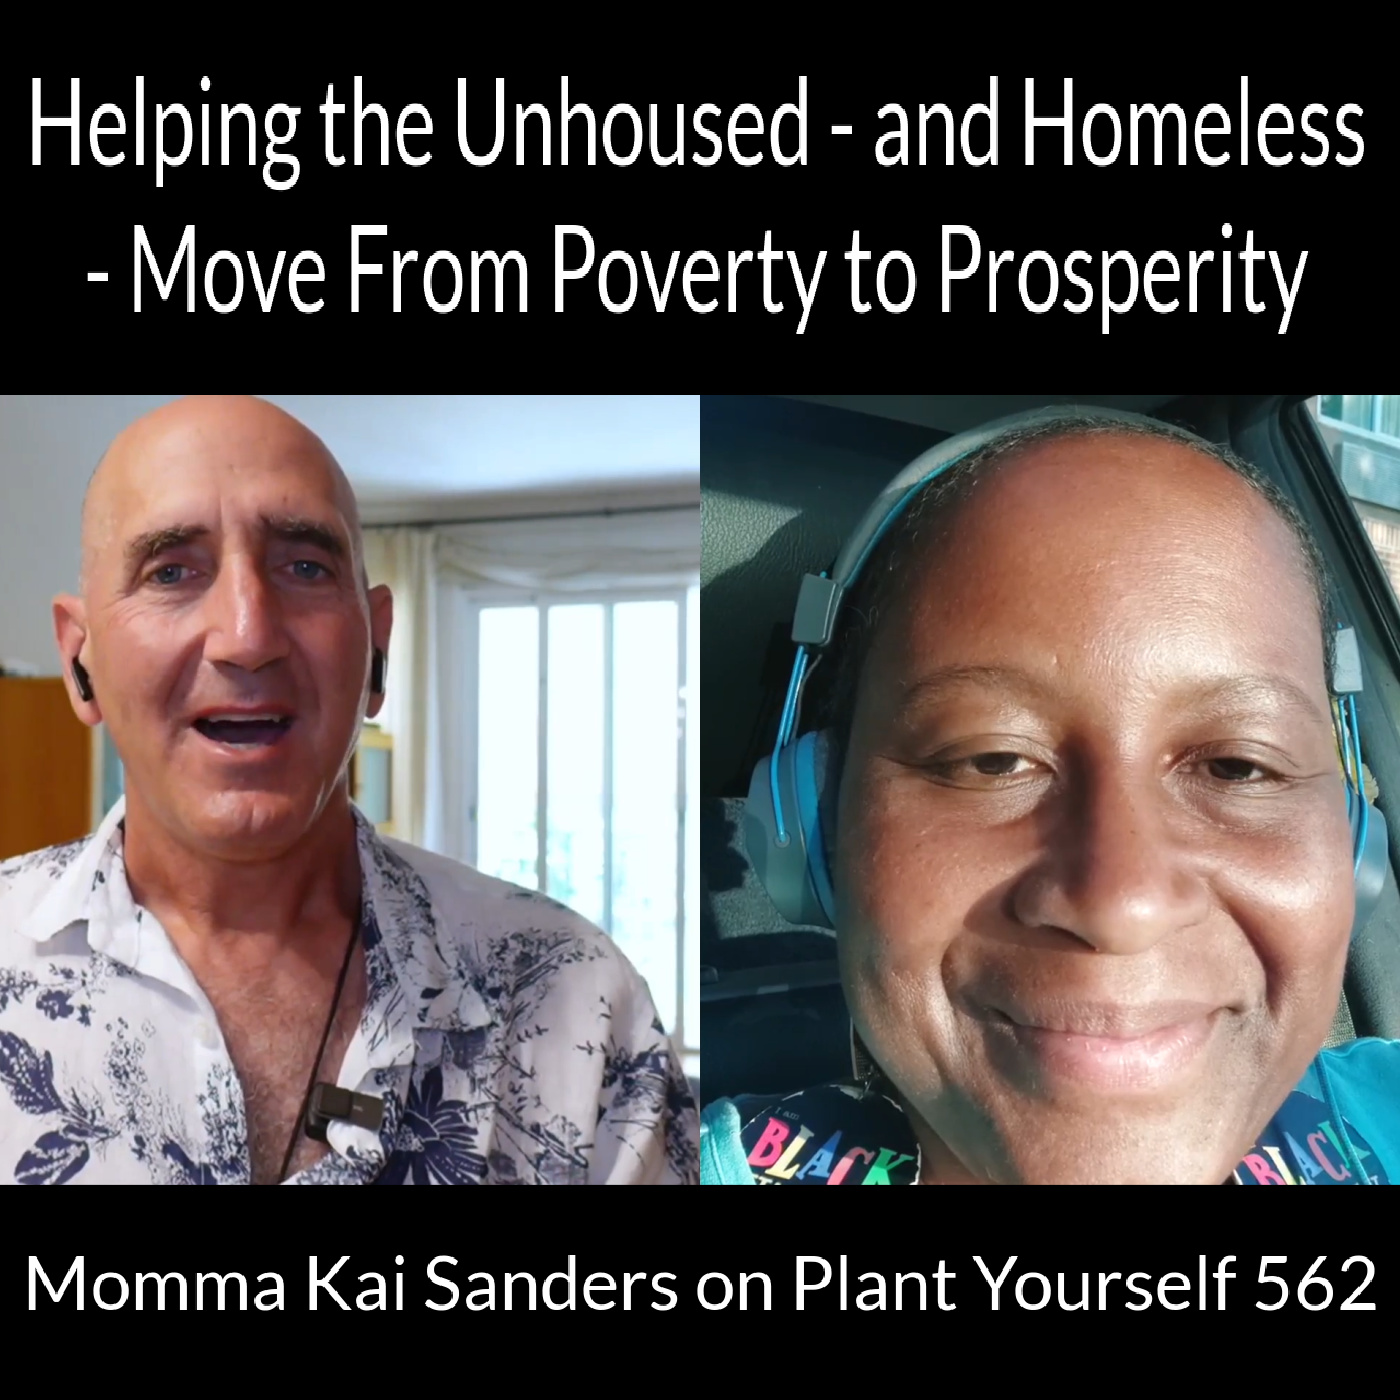 Helping the Unhoused - and Homeless - Move From Poverty to Prosperity: Momma Kai Sanders on PYP 562